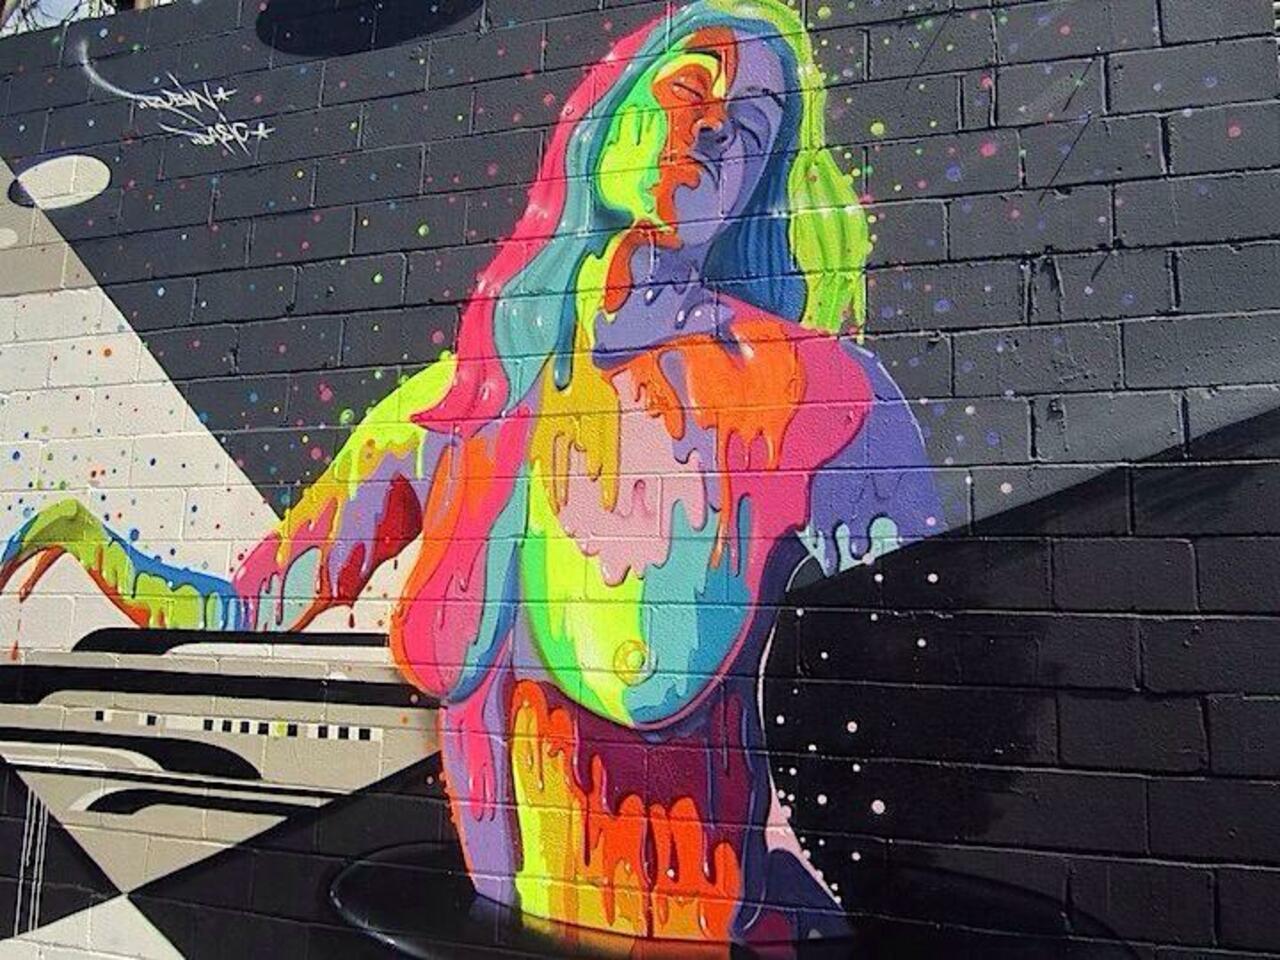 RT @designopinion: 4 different unique & surreal yet brilliant Street Art pieces from Dasic in NYC #art #graffiti #mural #streetart http://t.co/P7Oa9FMhDq